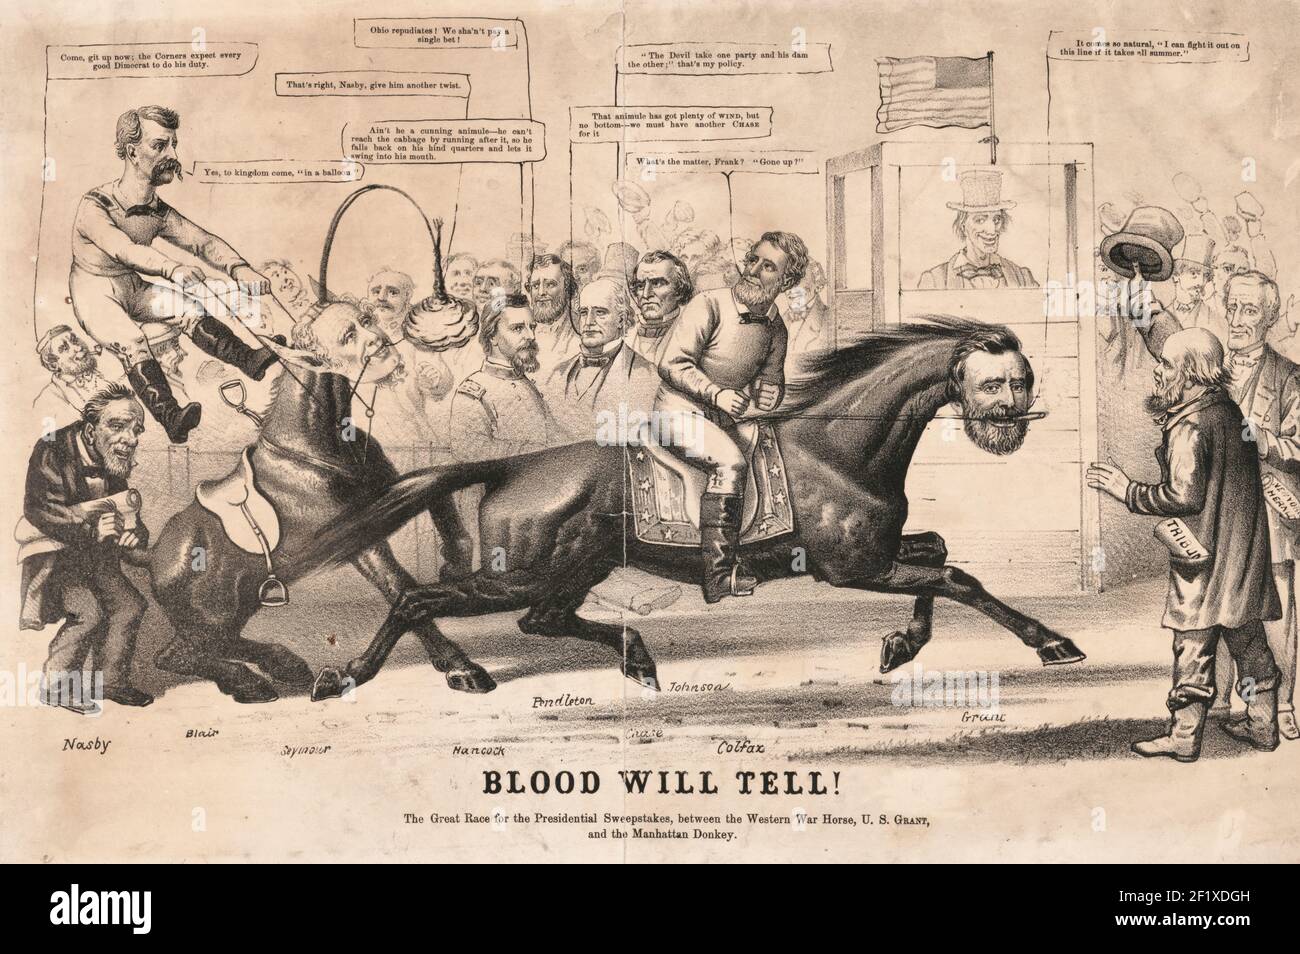 Blood will tell! The Great Race for the presidential sweepstakes, between the Western war horse, U. S. Grant, and the Manhattan donkey - 1868 Presidential Election Cartoon - Print shows a race with two horses, one with the head of Ulysses Grant and the other with the head of Horatio Seymour, the presidential candidates for 1868. The Grant horse, ridden by Schulyer Colfax is in the lead while the rider of the Seymour horse, Frederick Preston Blair, is being tossed. A cabbage hangs in front of the Seymour horse to entice him to move forward while David Ross Locke, labeled 'Nasby' twists its tai Stock Photo